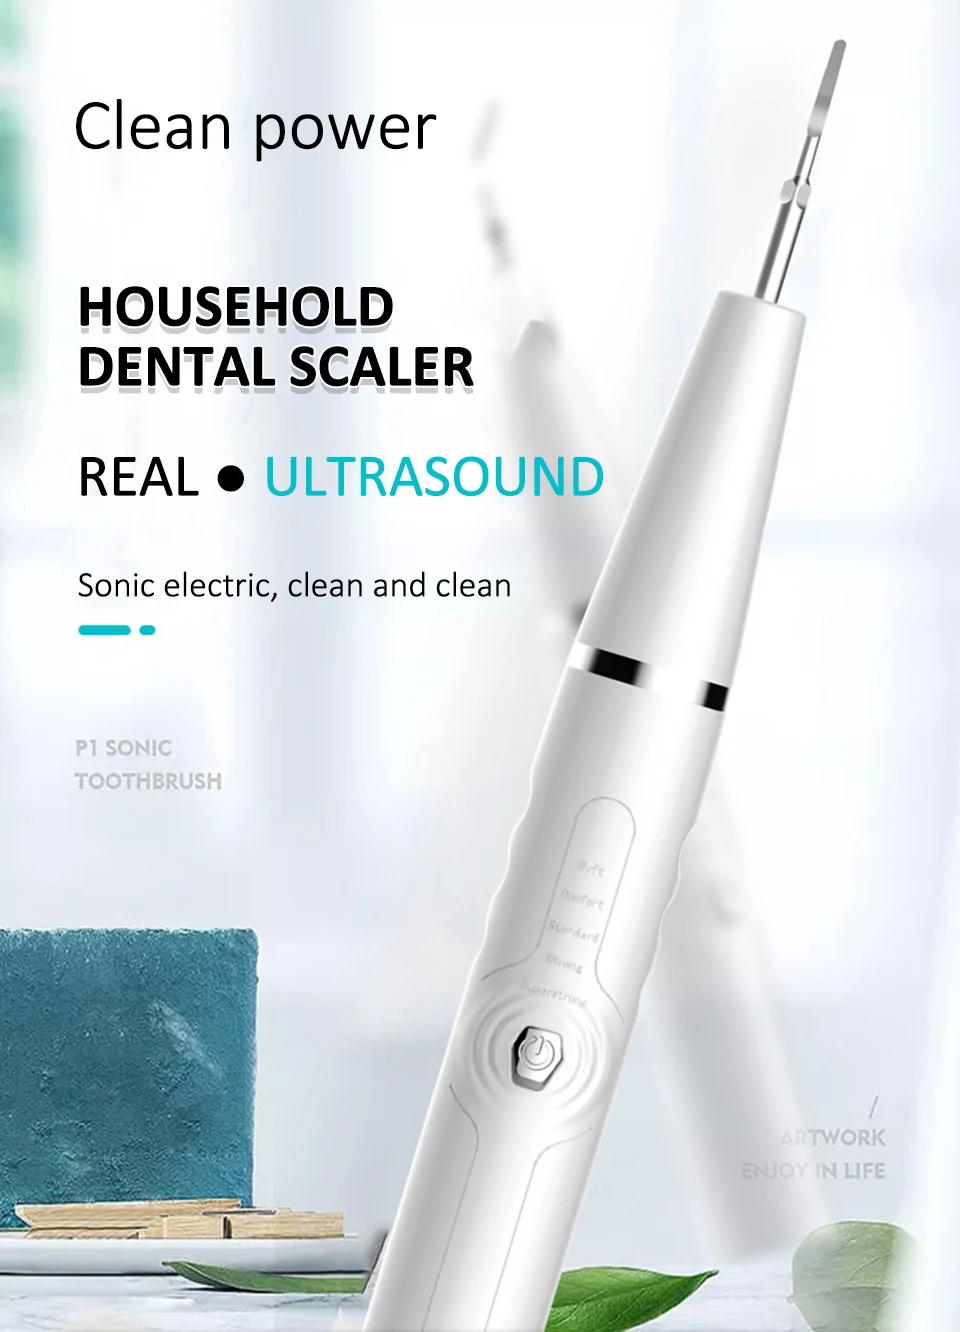 

Home Use Electric Dental Scaler Ultrasonic Calculus Remover Tooth Cleaner LED Light Sonic Smoke Stains Tartar with Dental Floss